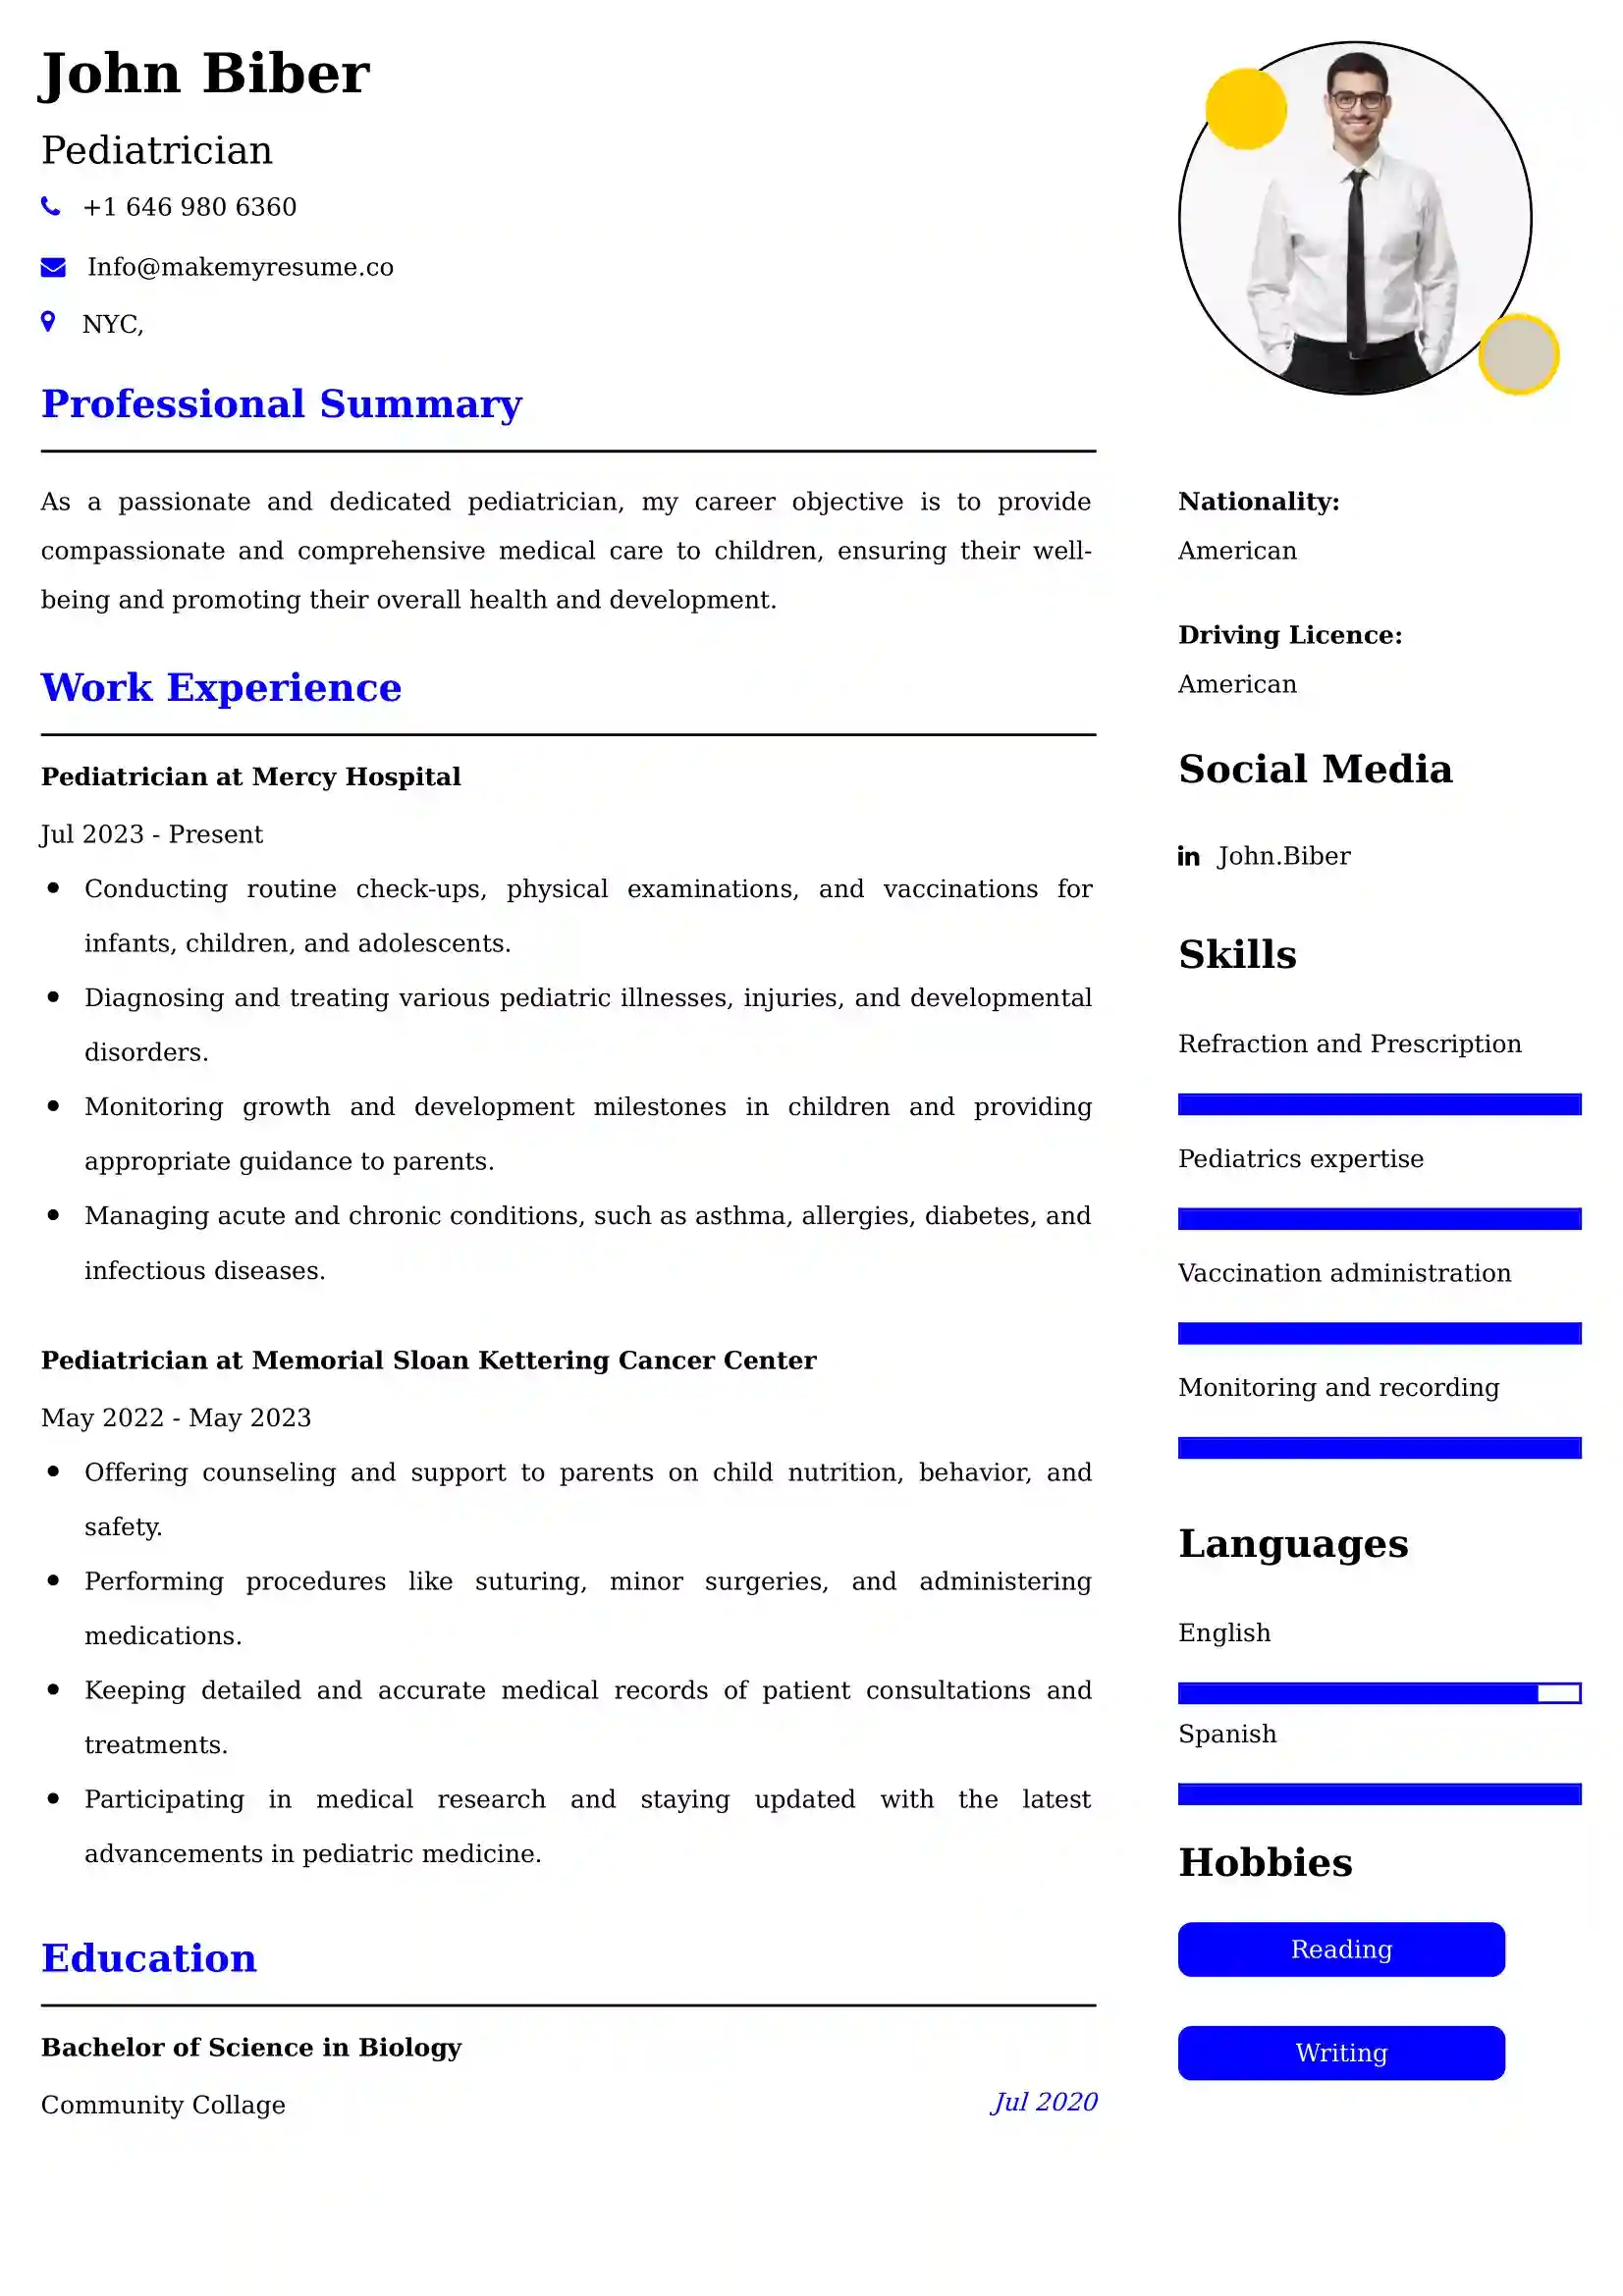 Pediatrician Resume Examples for UK Jobs - Tips and Guide